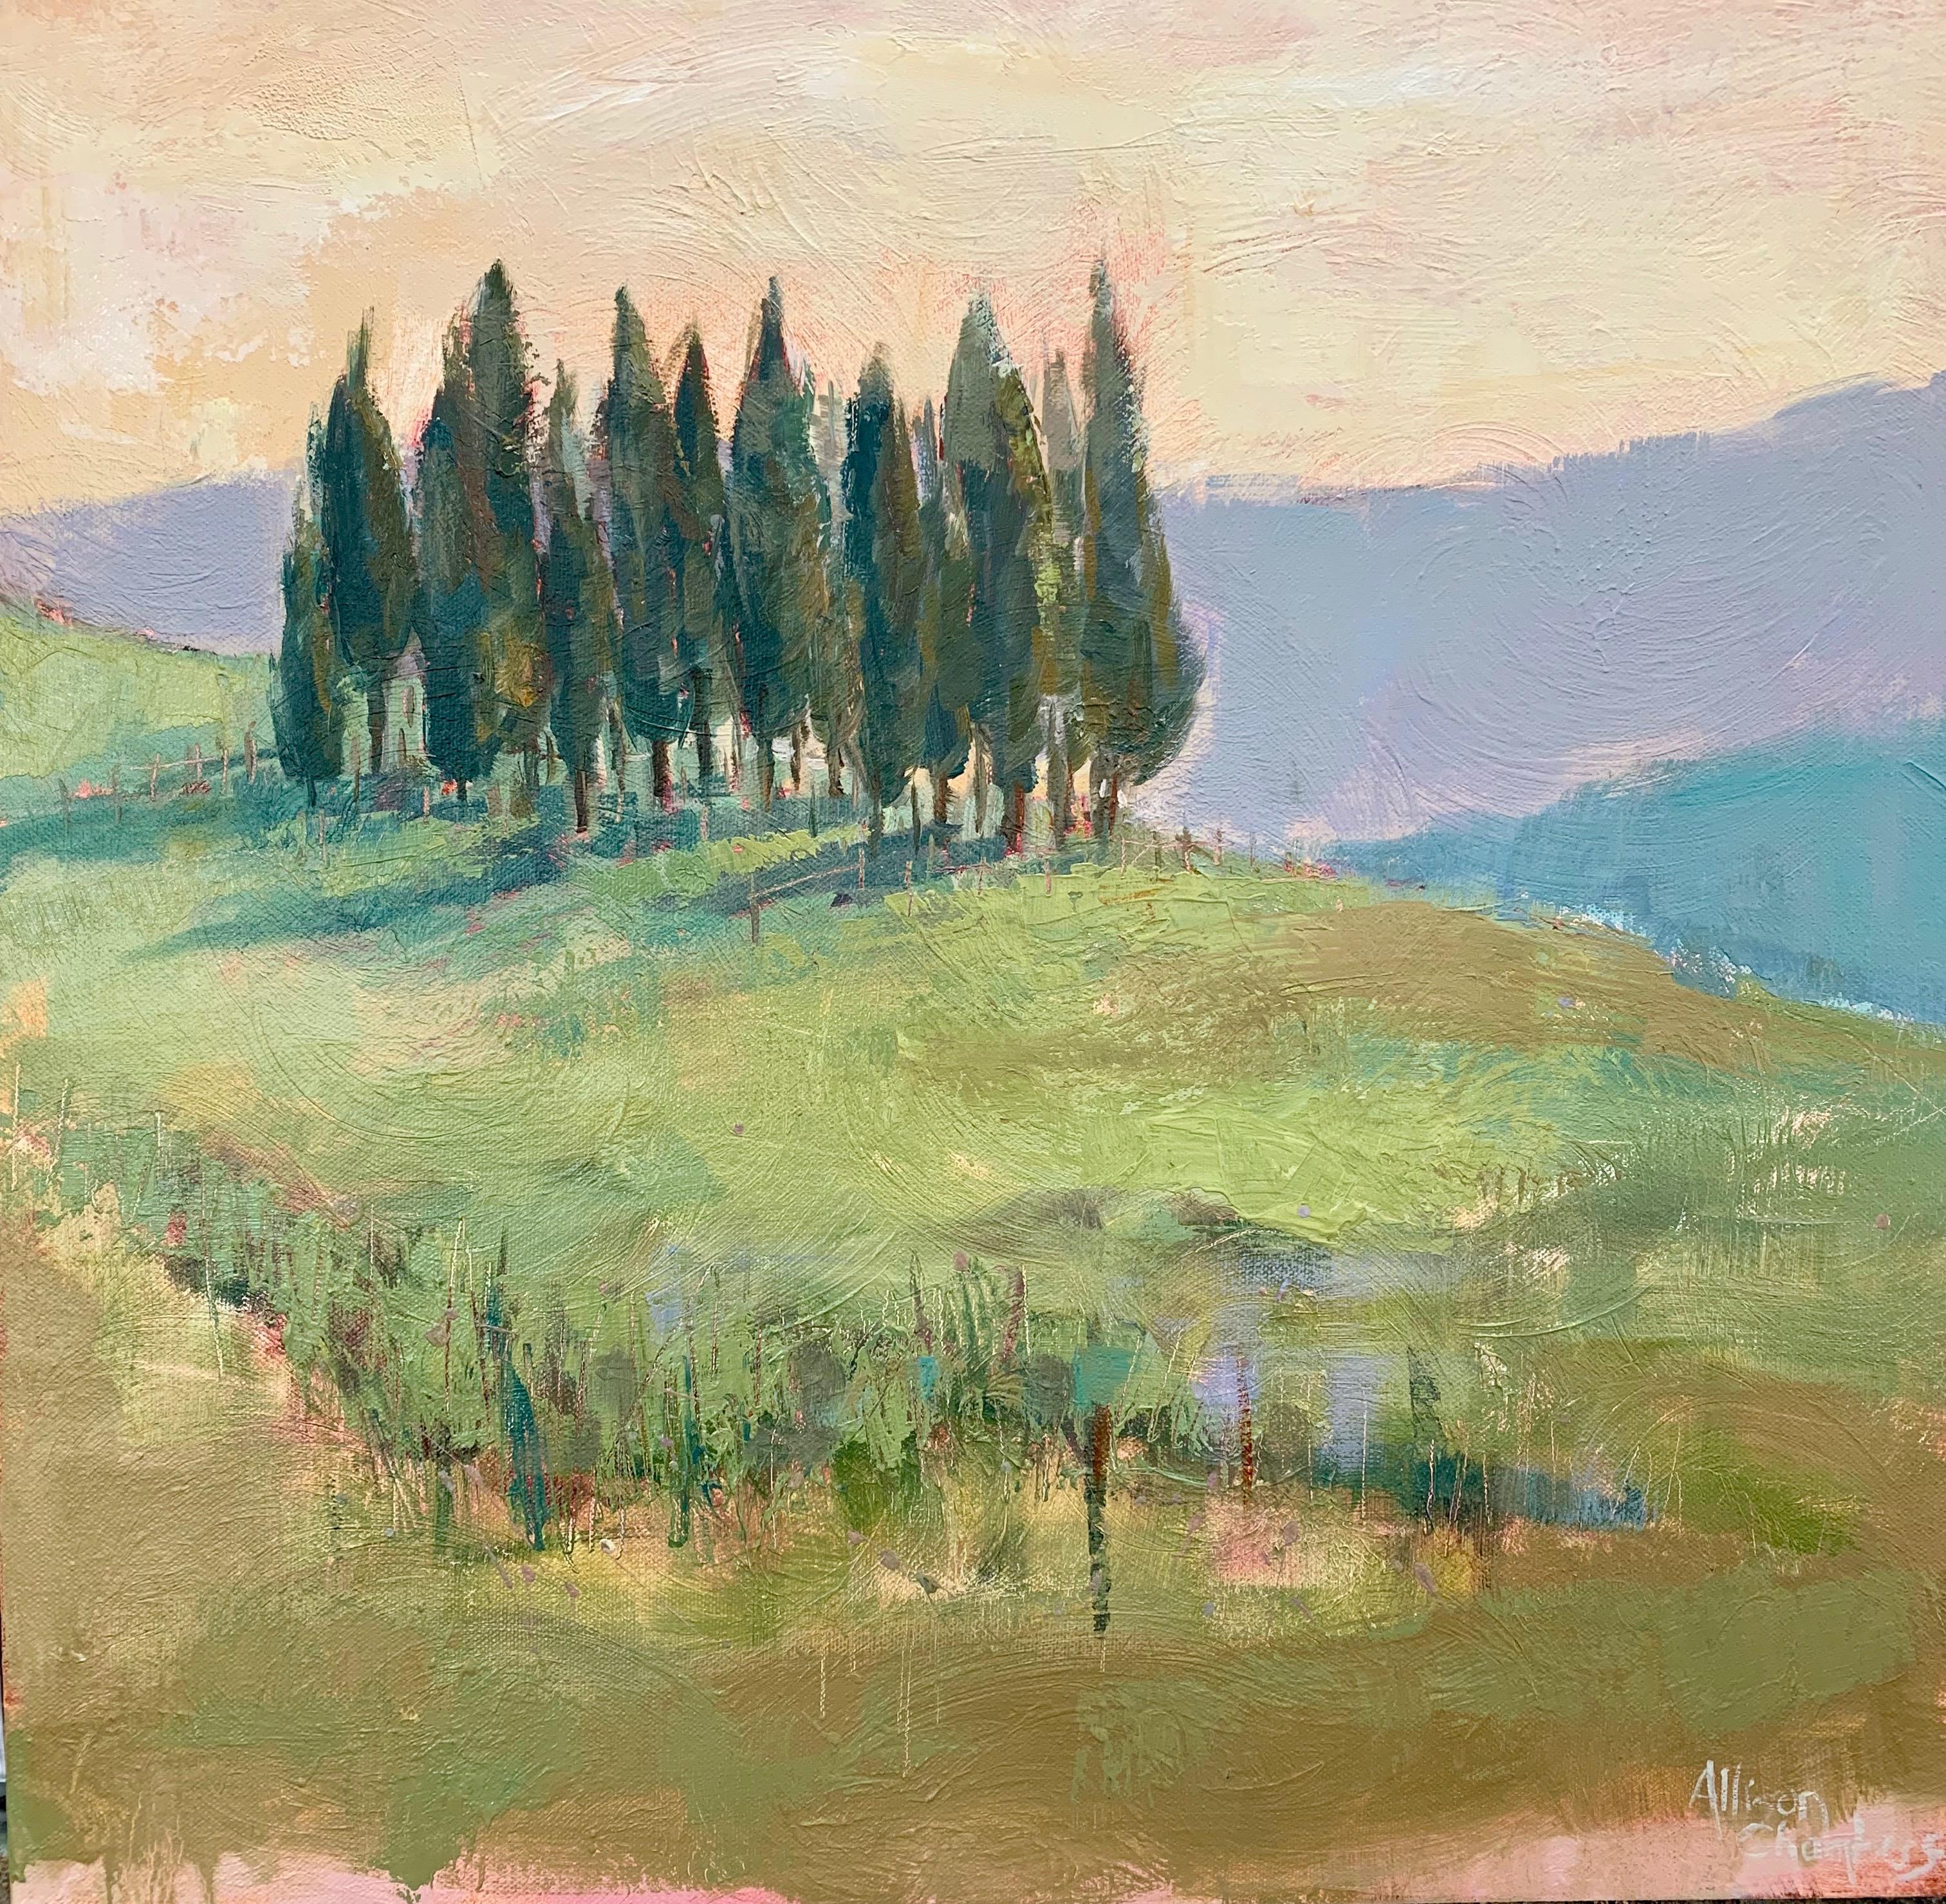 'Once Upon a Hill' is a framed Impressionist oil on canvas painting created by American artist Allison Chambers in 2019. Featuring a palette made of green, purple, pink and ocher tones, the painting depicts a grouping of cypress trees accentuating